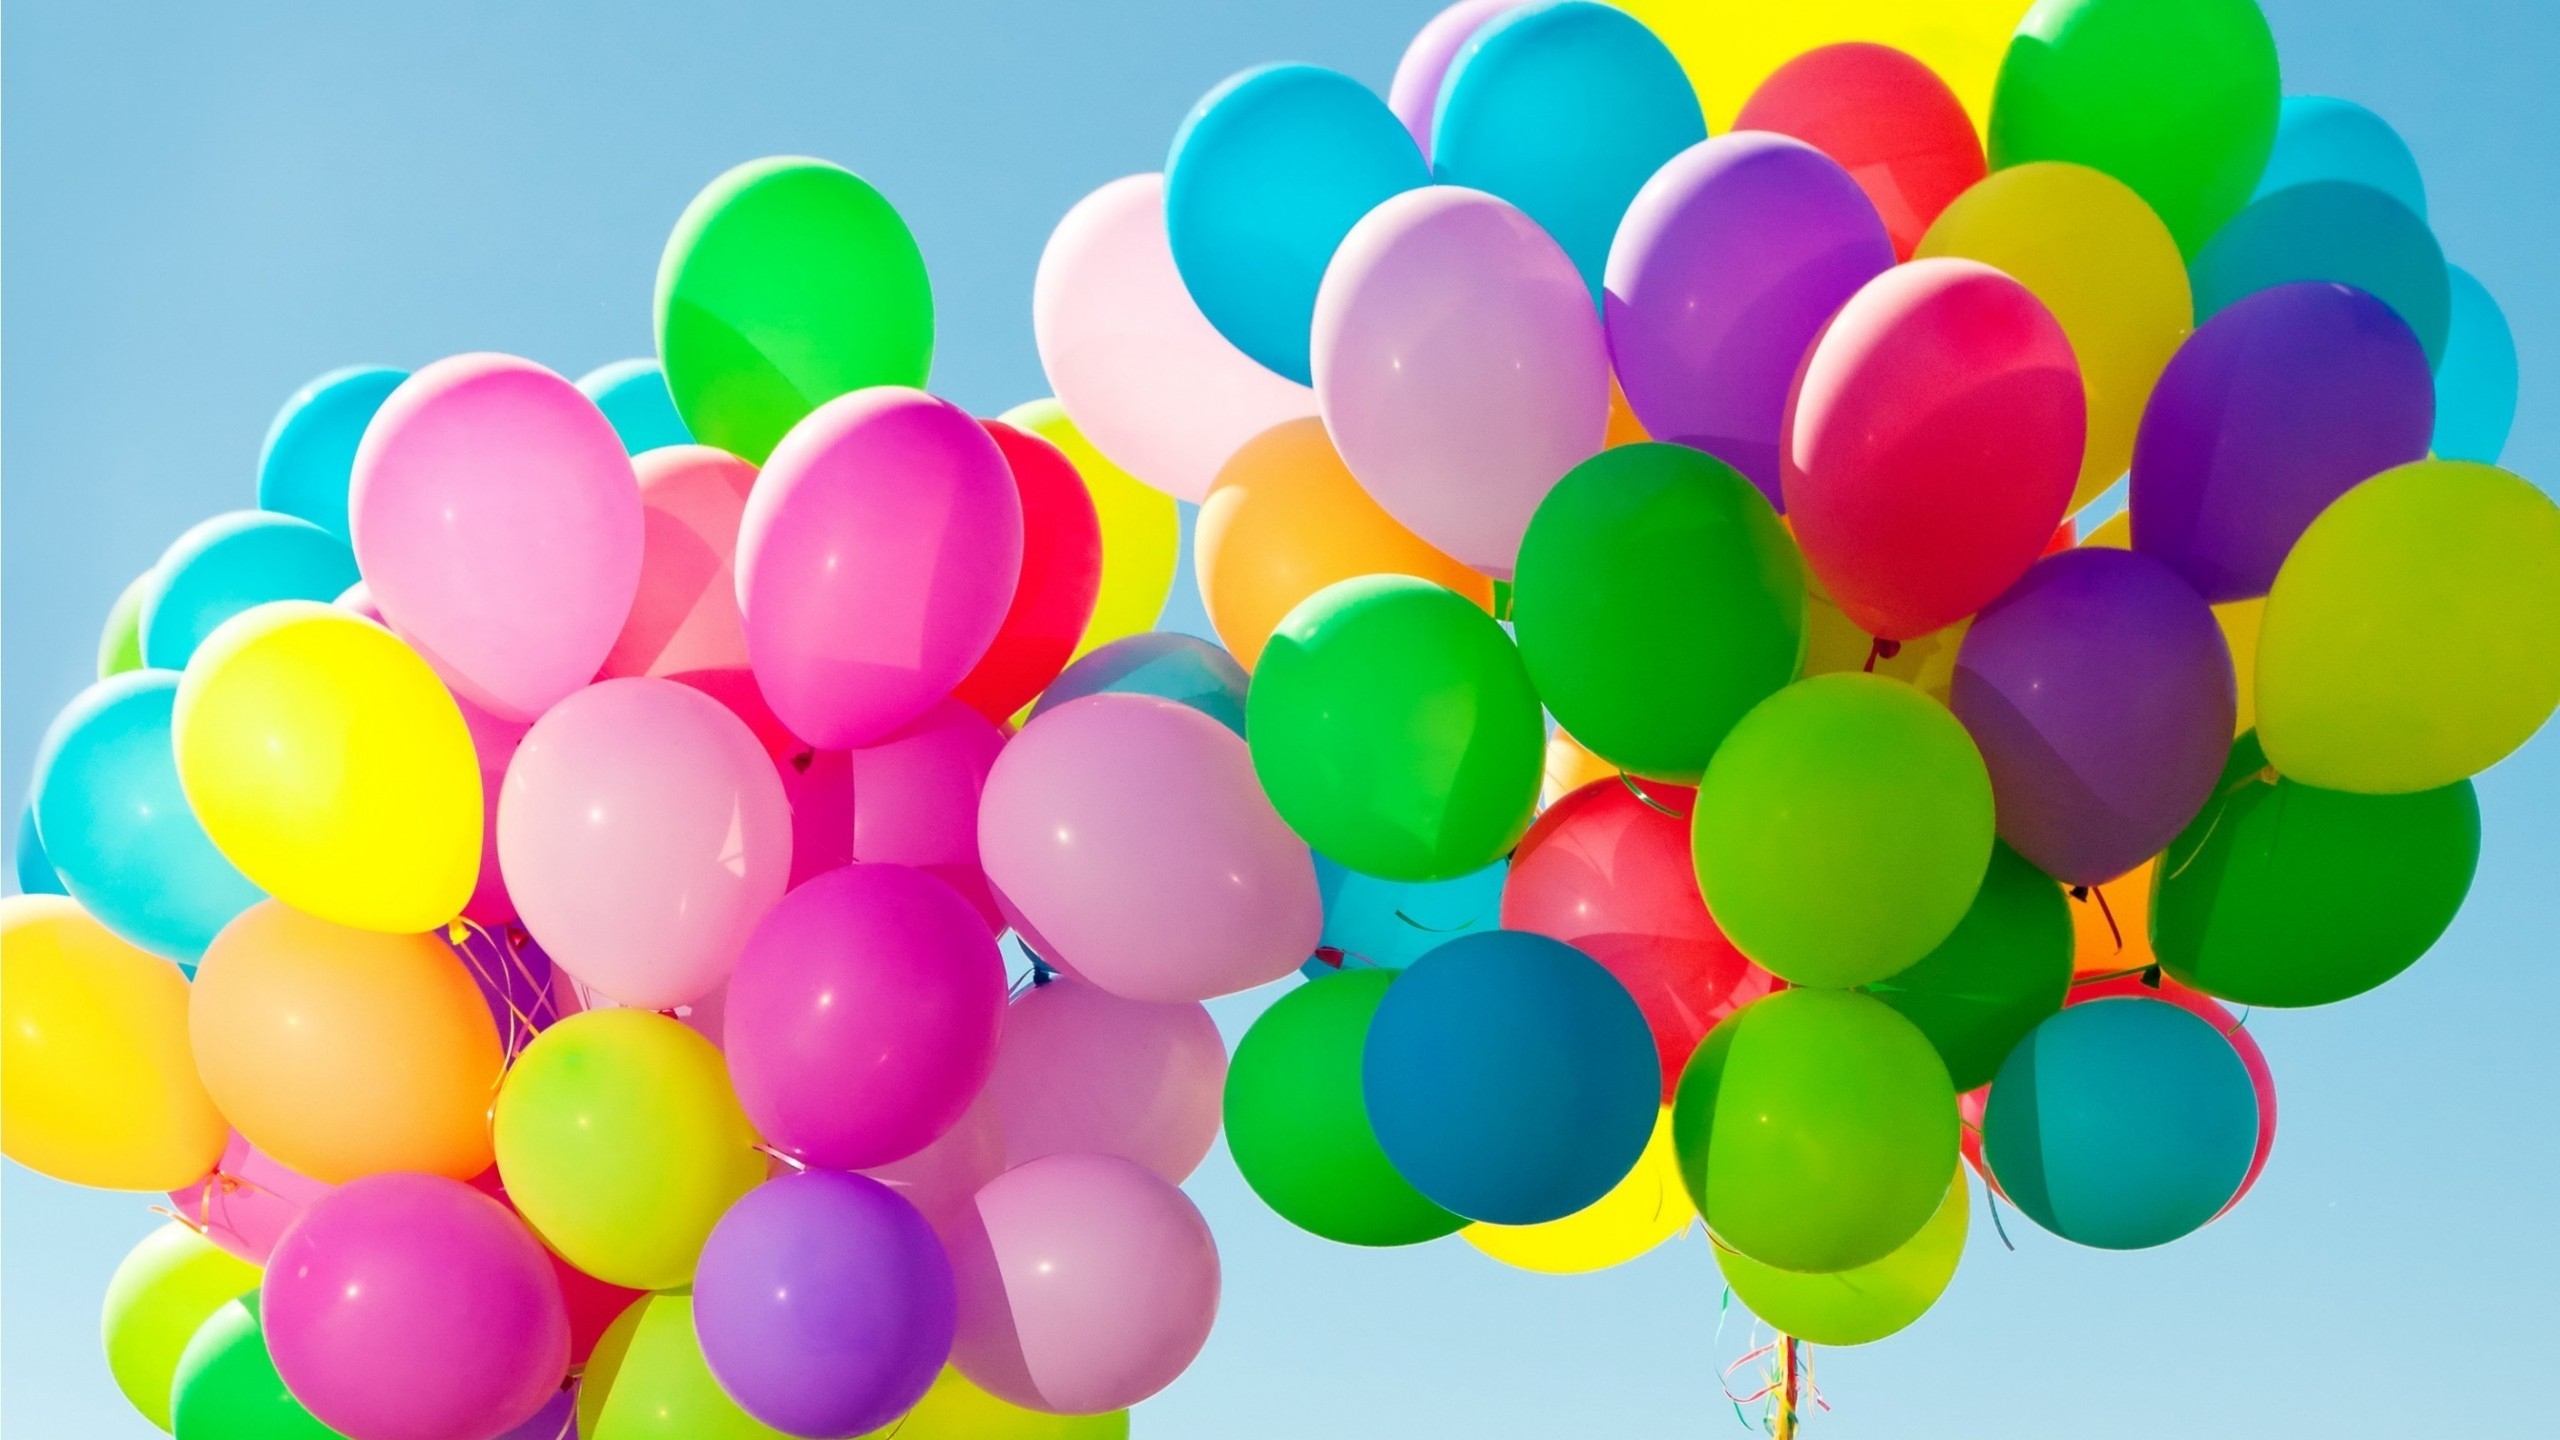 Colorful Balloons in the Sky for 2560x1440 HDTV resolution